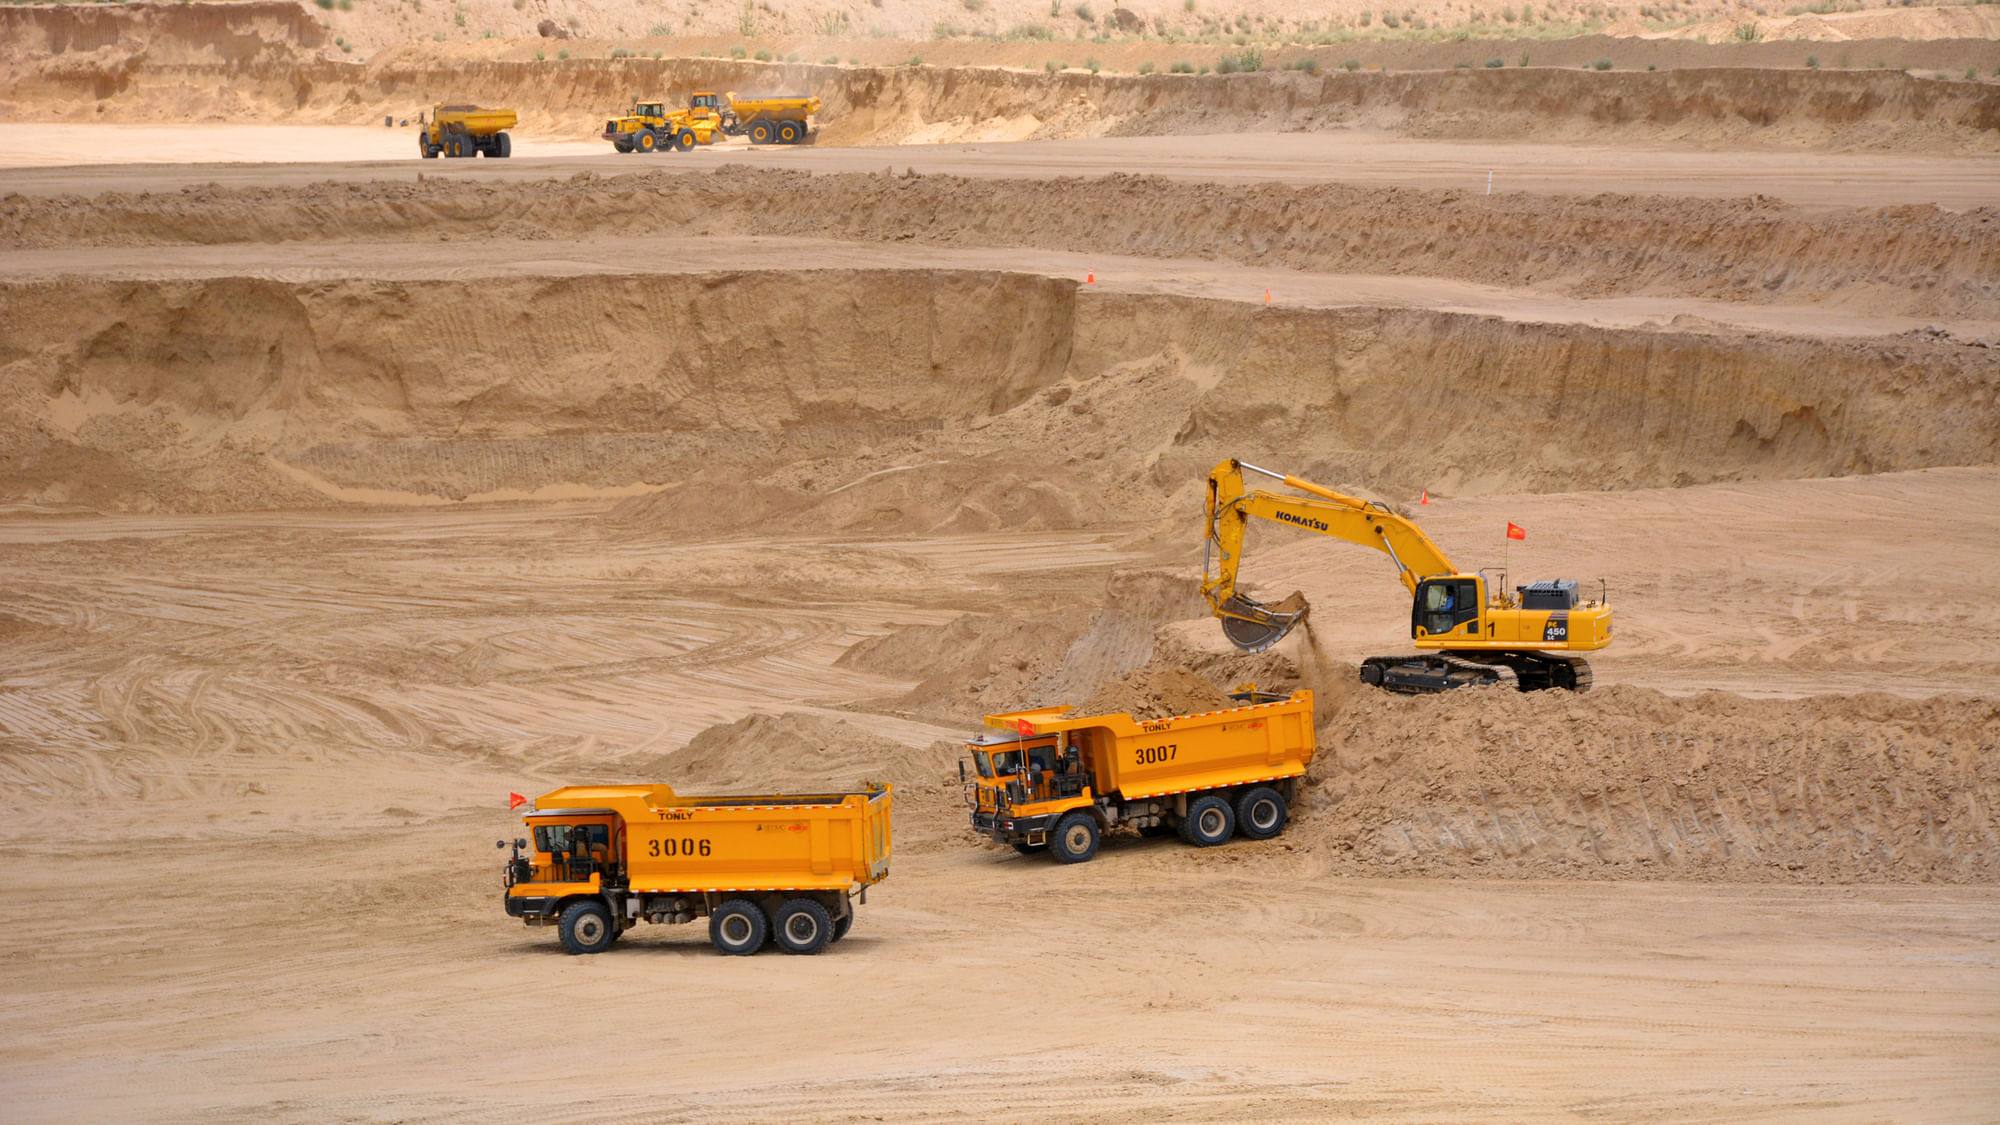 

Pakistan’s Thar desert contains one of the largest untapped coal deposits in the world. (Photo Courtesy: Amar Guriro)